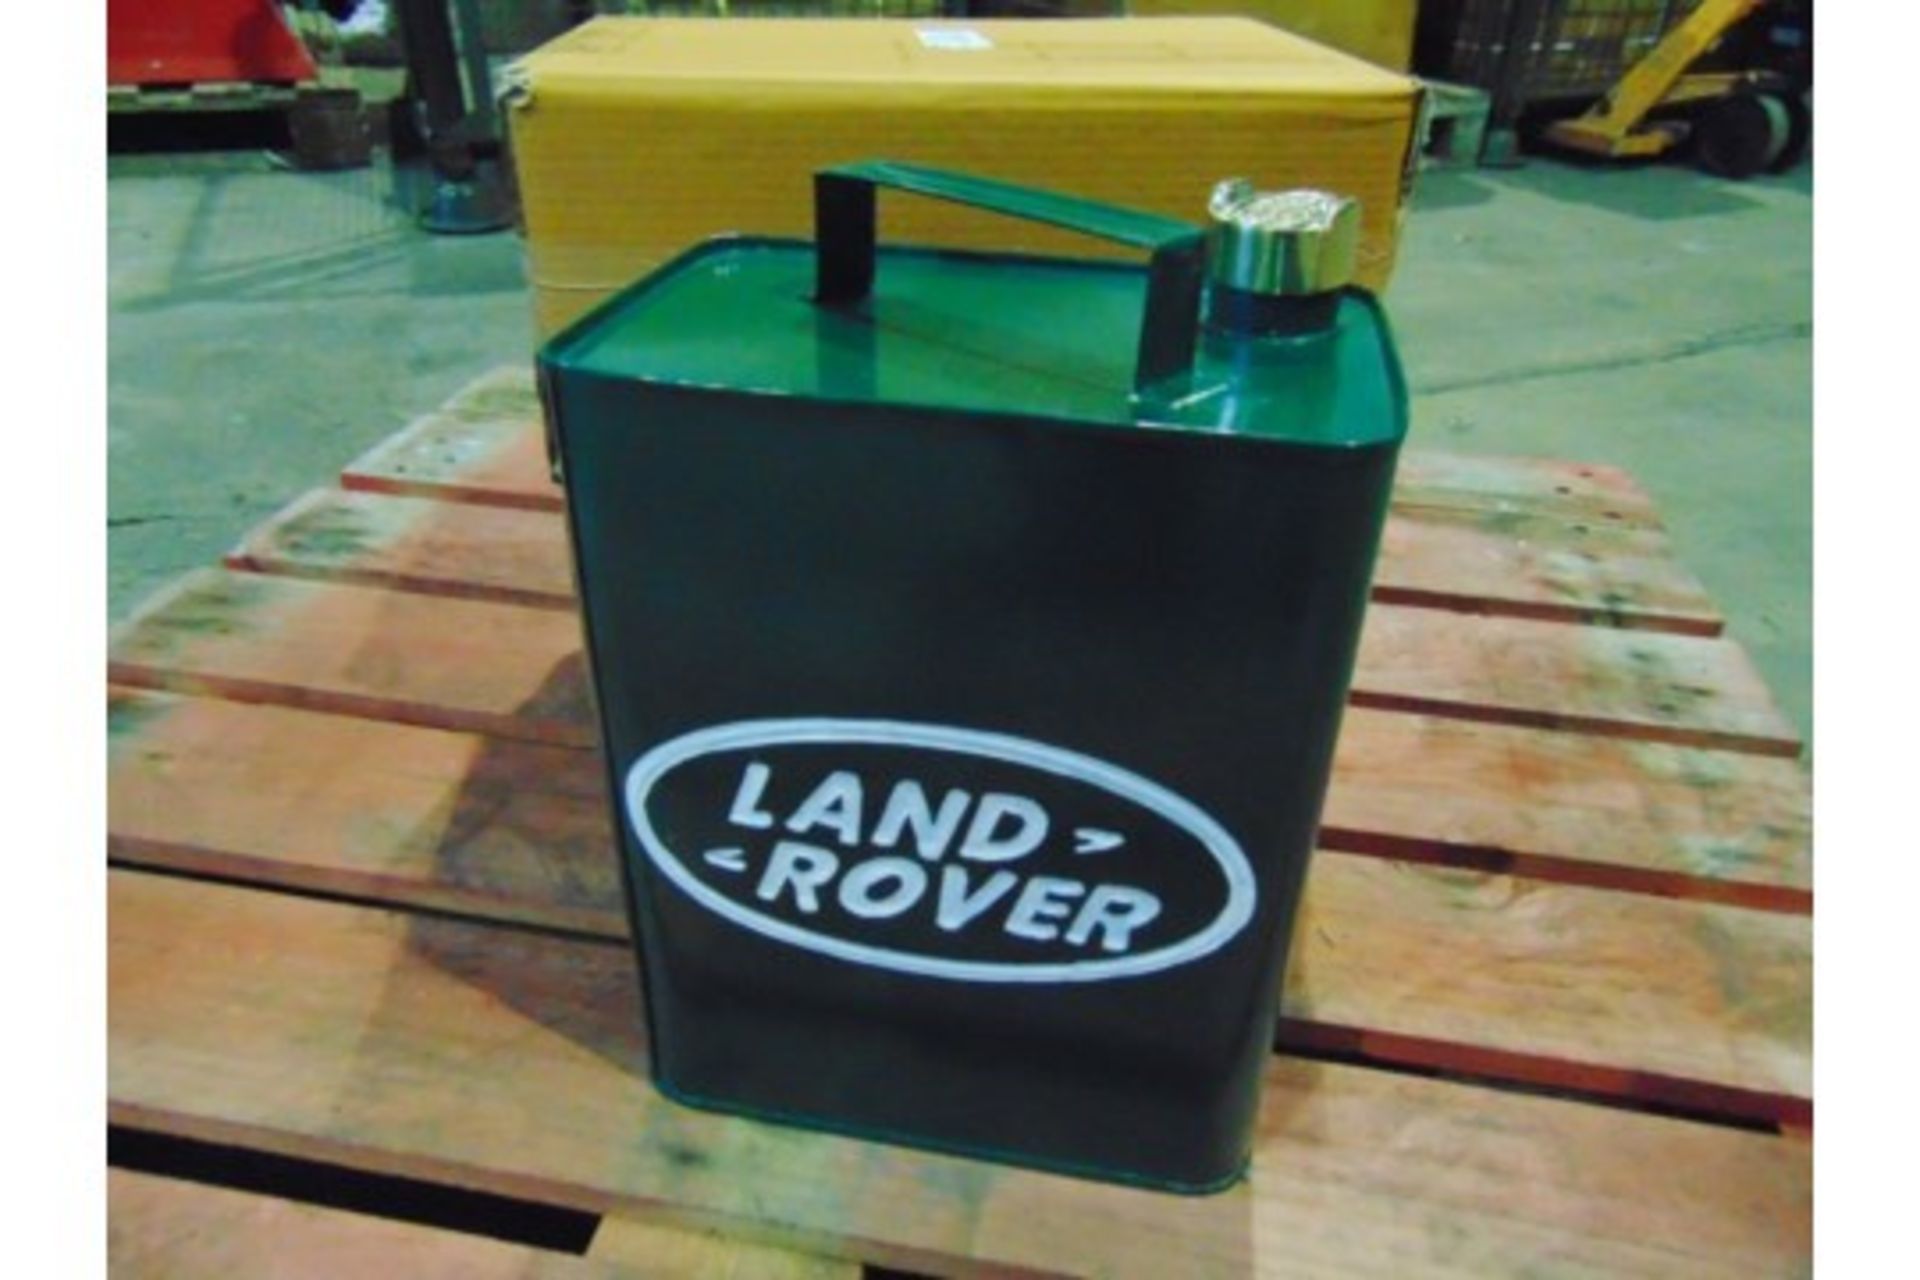 Reproduction Land Rover Branded Oil Cans - Image 5 of 5